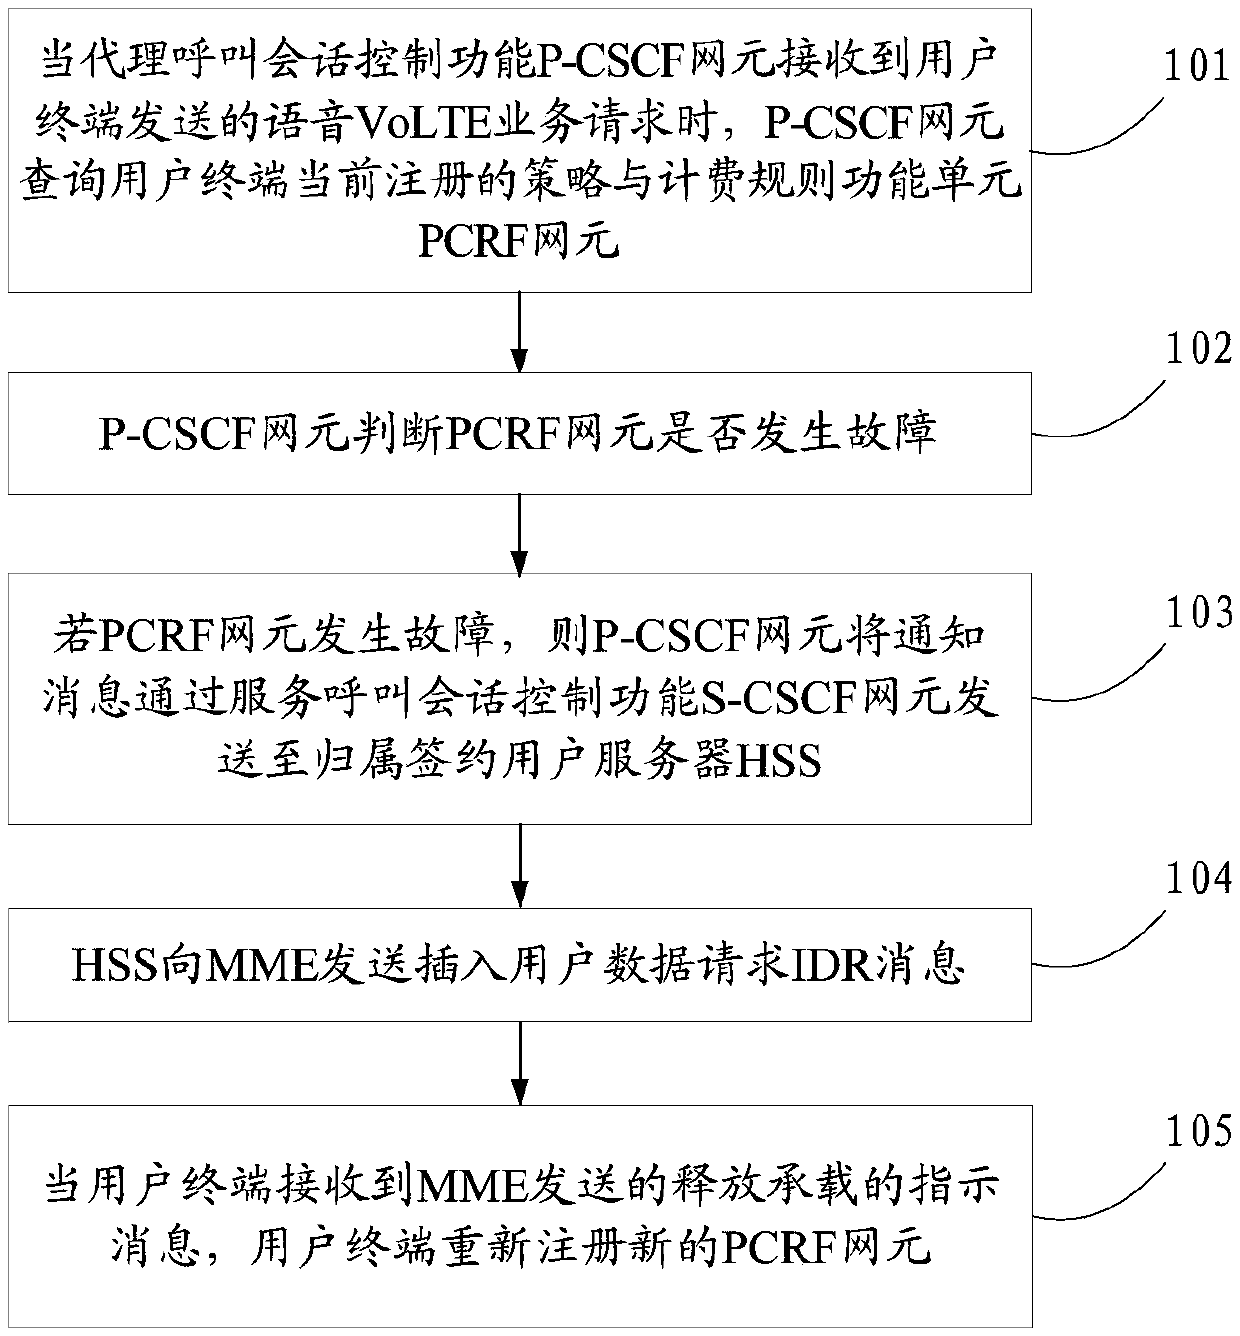 Method and device for service restoration after PCRF (Policy and Charging Rules Function) fault